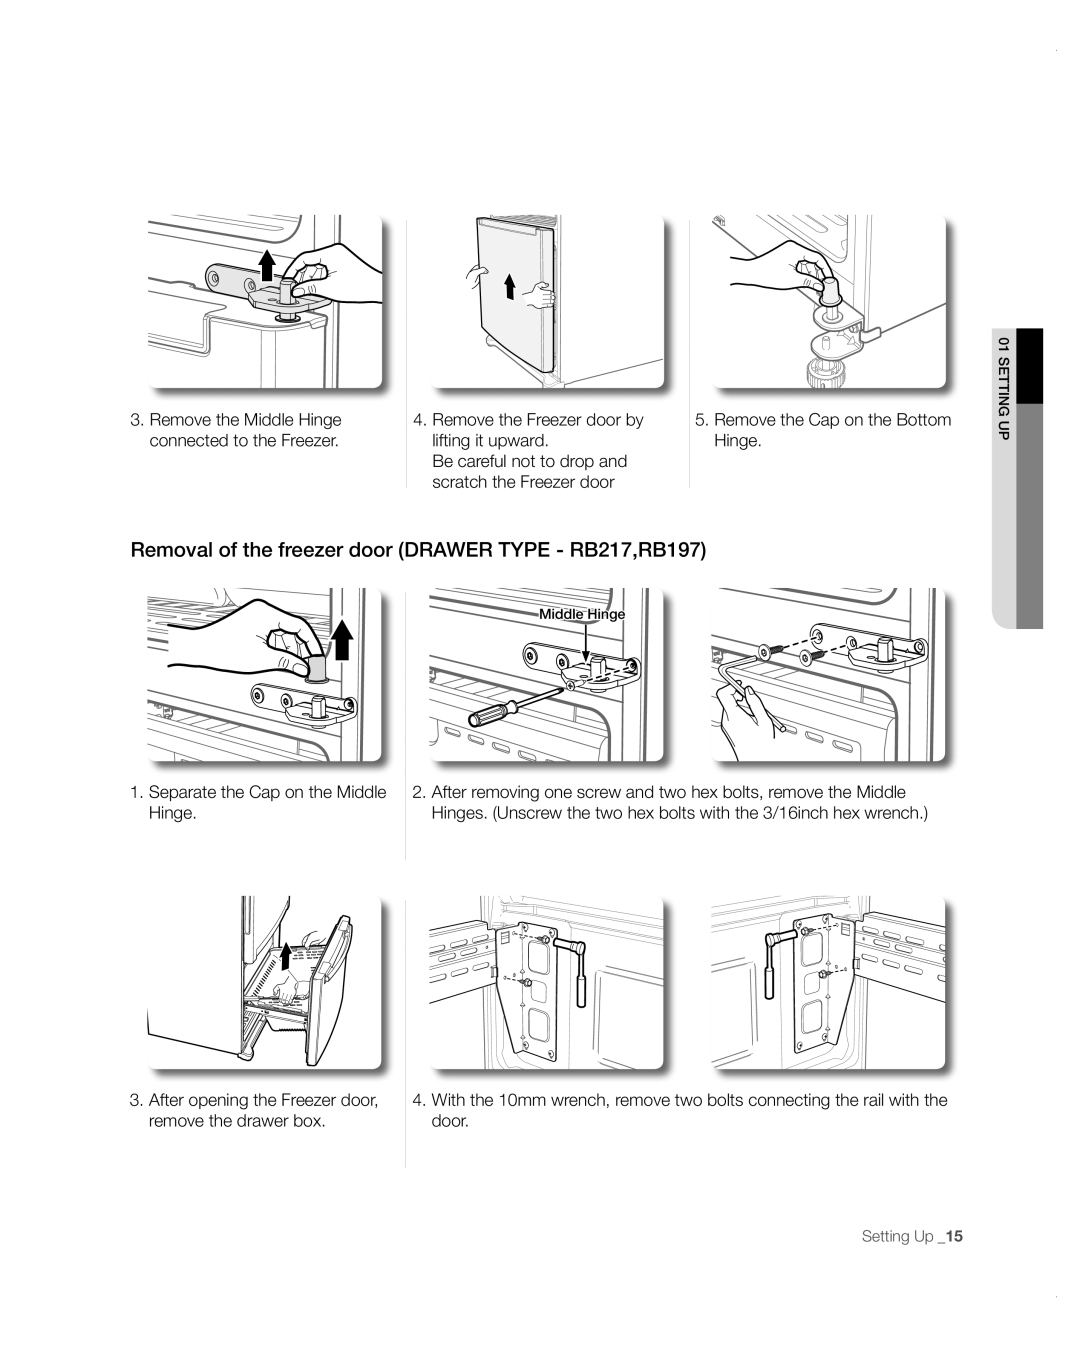 Samsung RB197ABBP user manual Removal of the freezer door DRAWER TYPE - RB217,RB197 